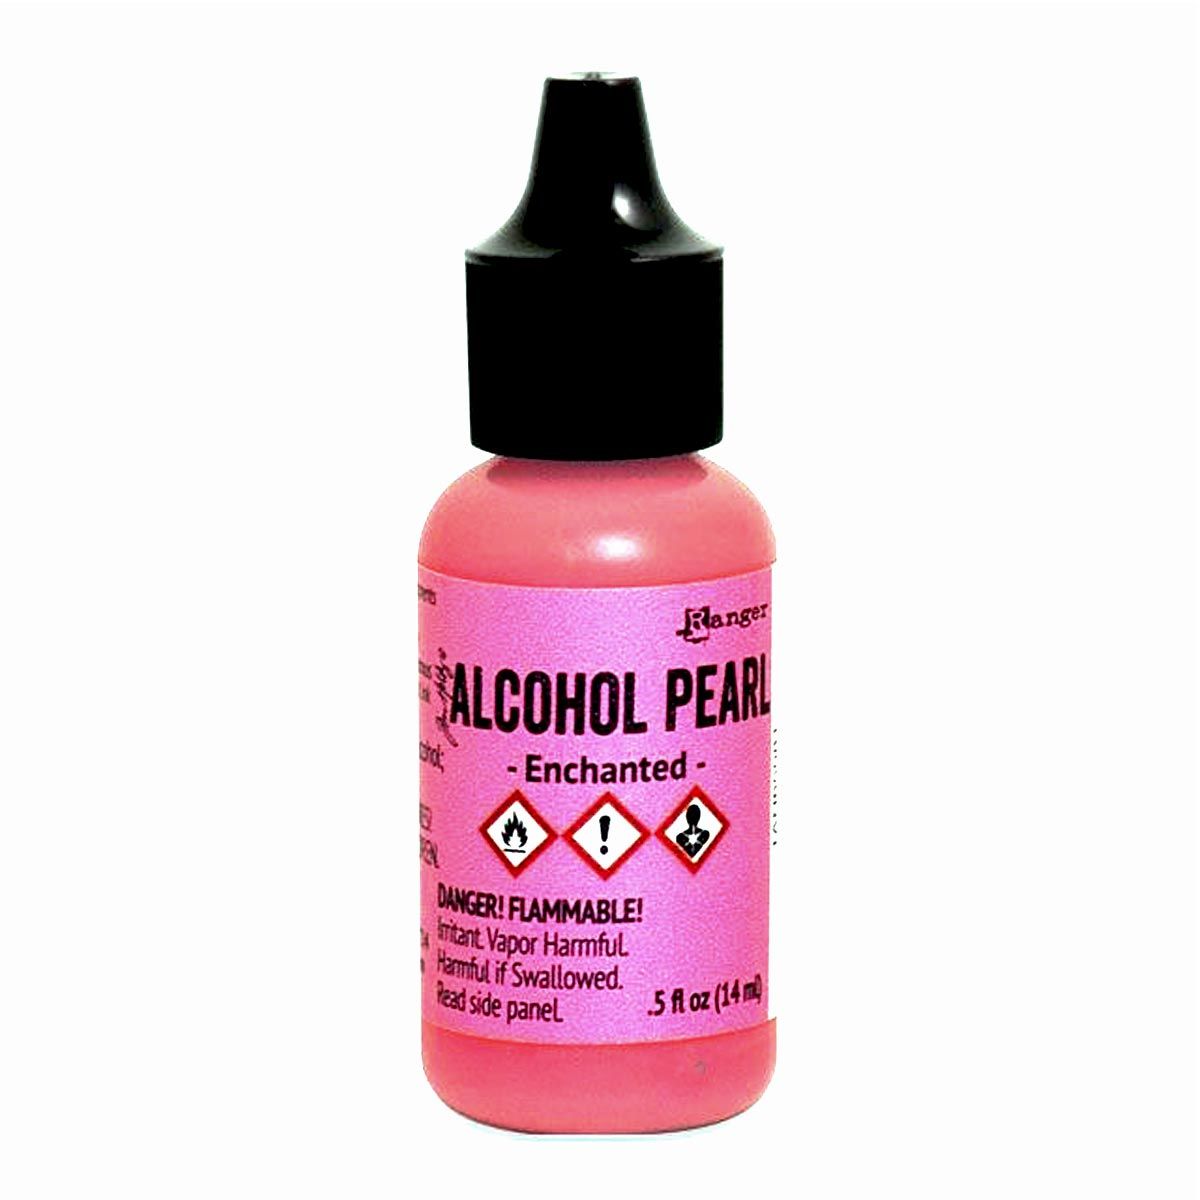 Tim Holtz Alcohol Ink Pearl Enchanted .5 oz